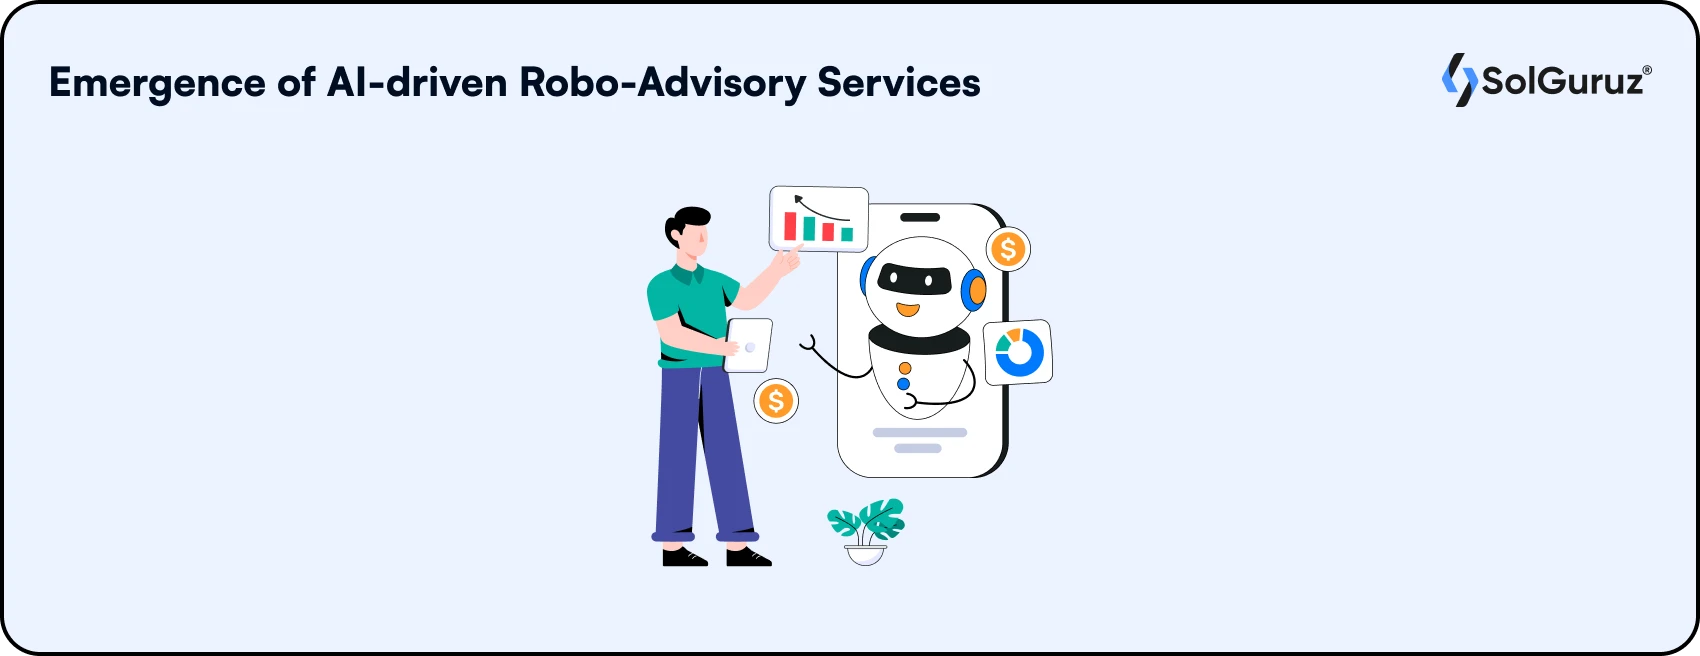 The Rise of AI-powered Robo-advisors with Human Touch in FinTech